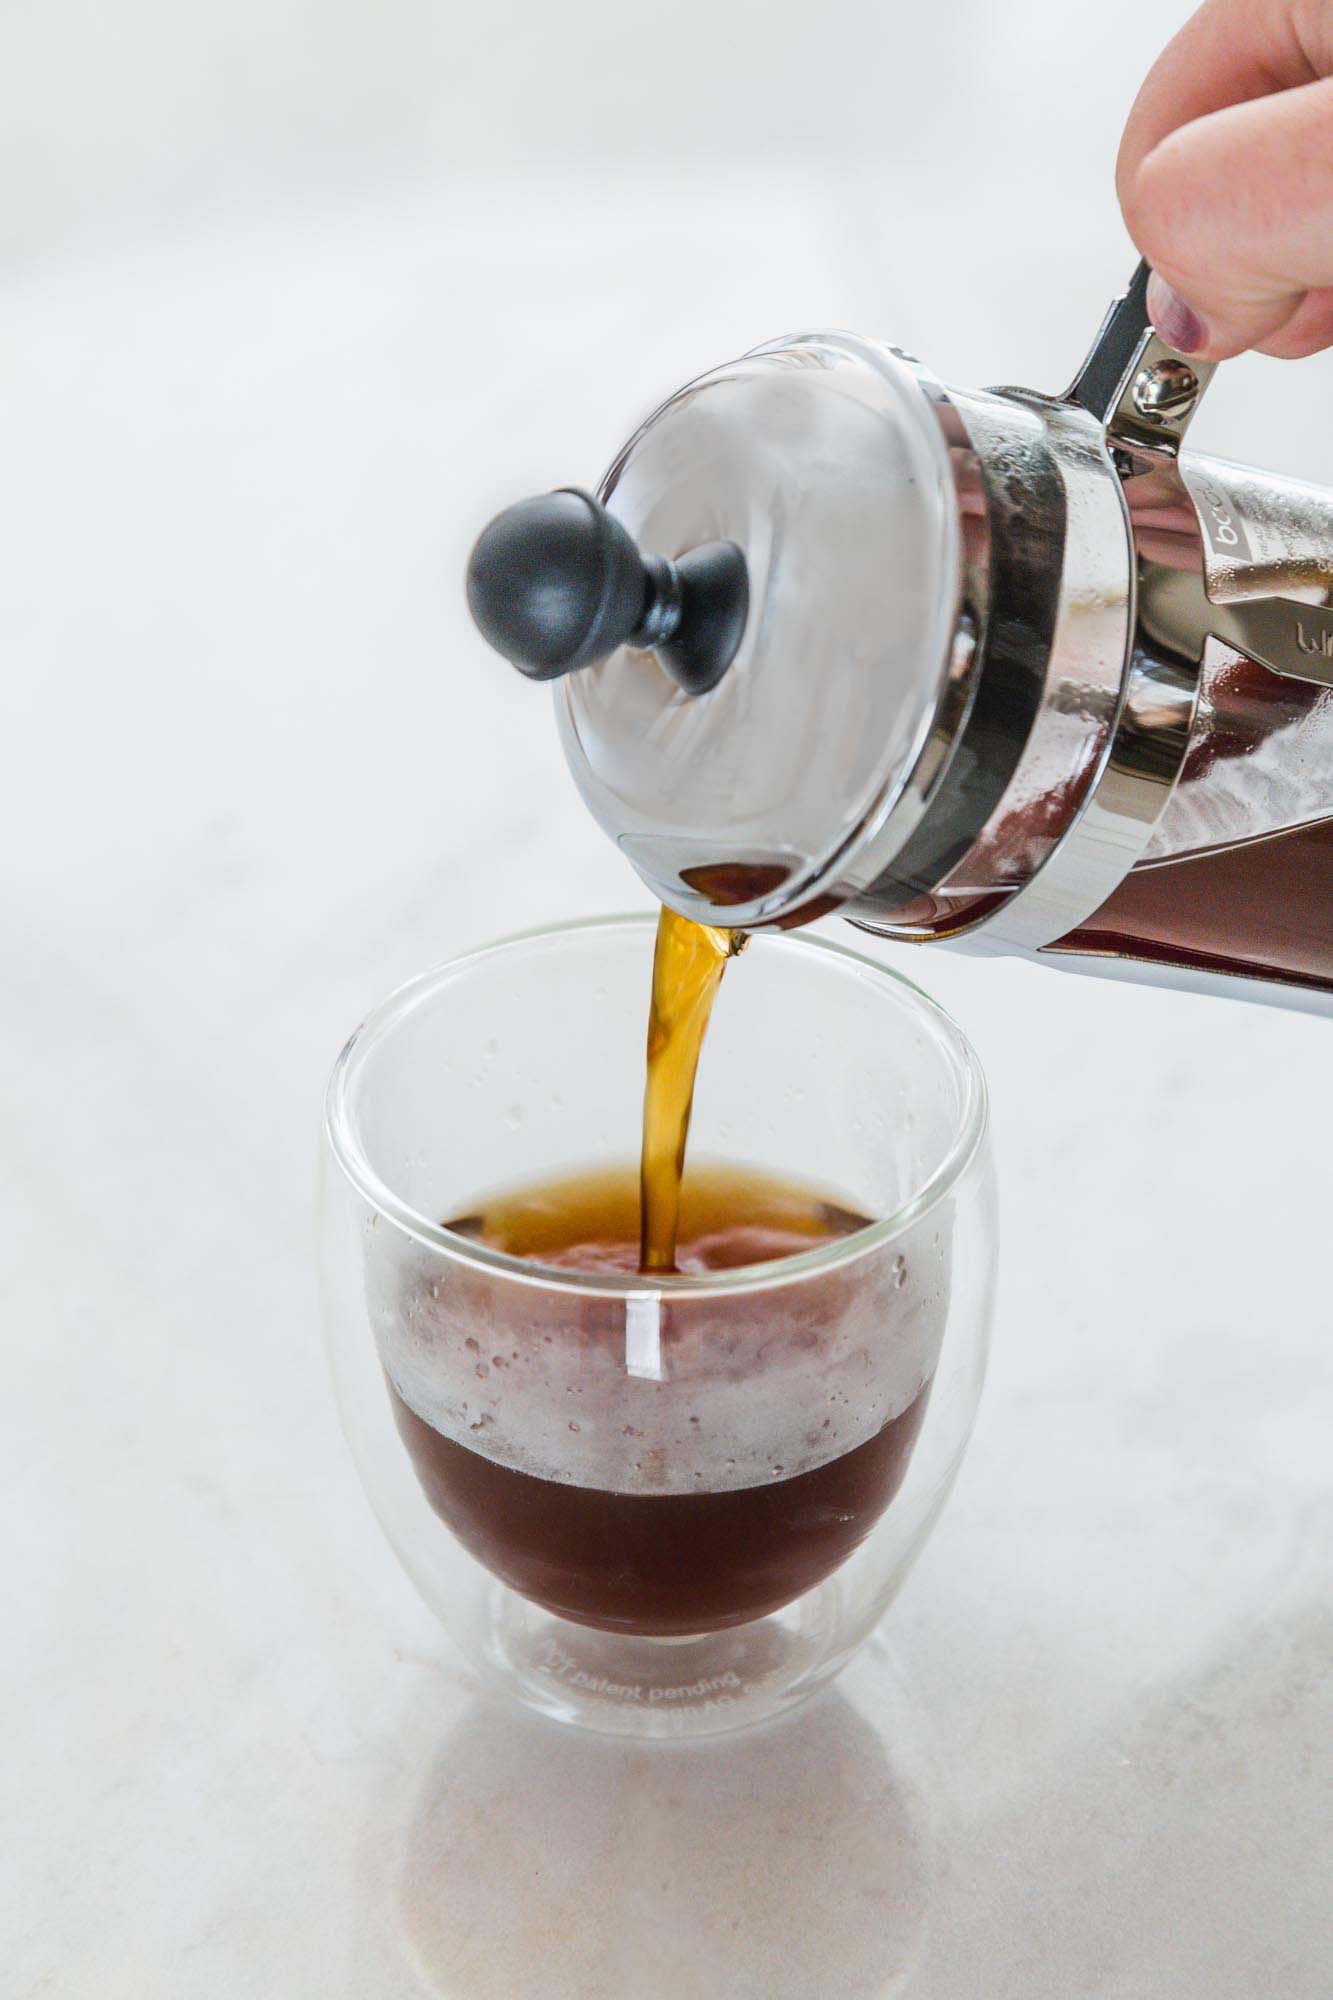 Pouring coffee from a french press into a double glass cup